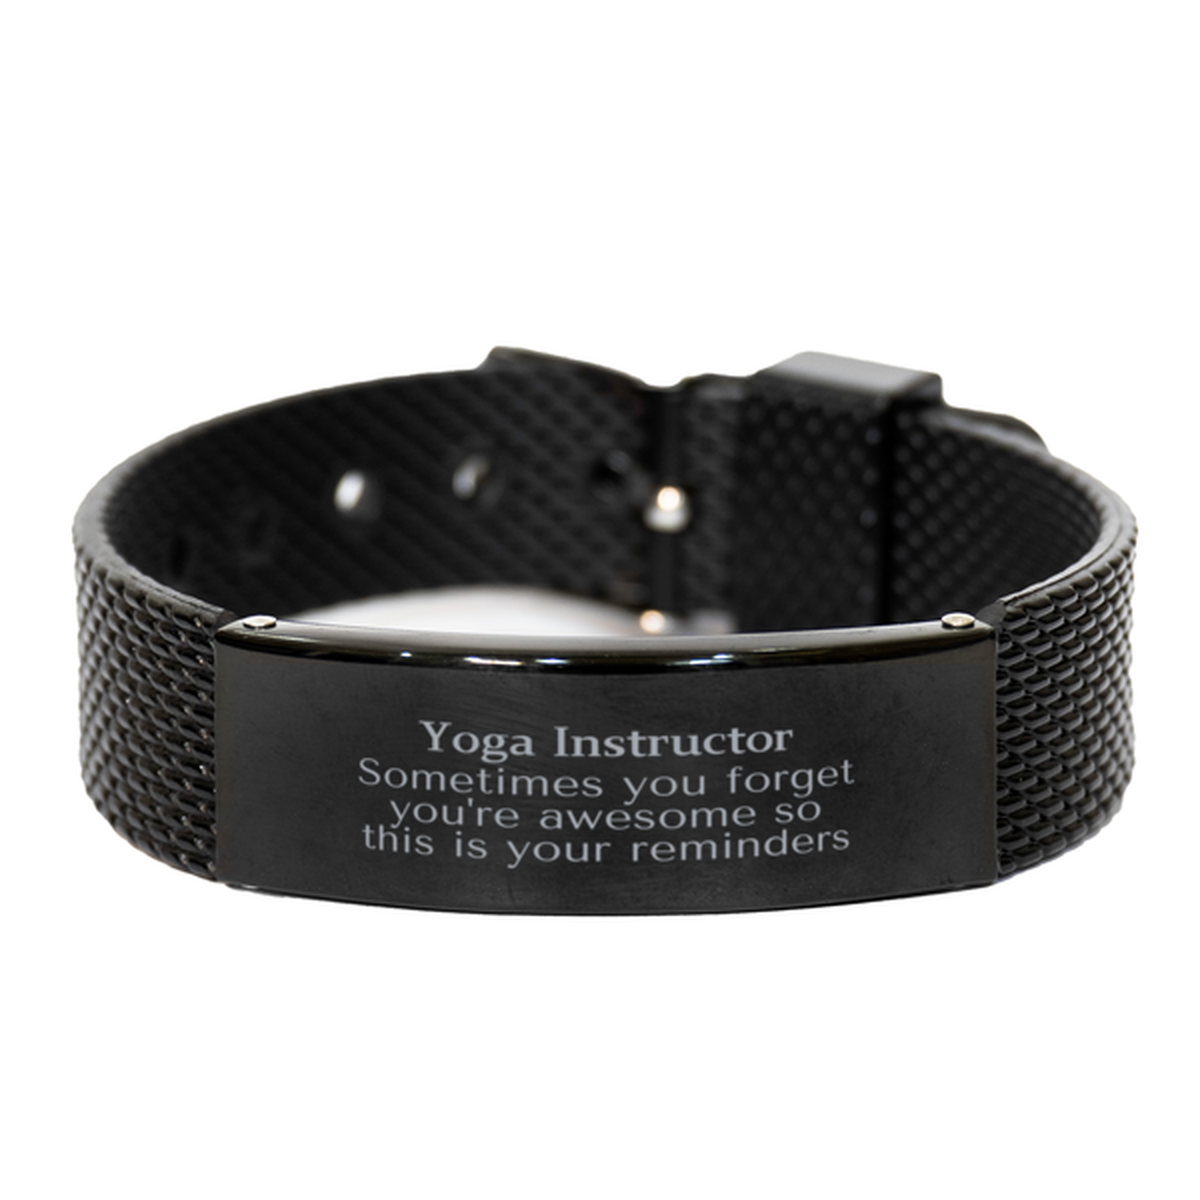 Sentimental Yoga Instructor Black Shark Mesh Bracelet, Yoga Instructor Sometimes you forget you're awesome so this is your reminders, Graduation Christmas Birthday Gifts for Yoga Instructor, Men, Women, Coworkers